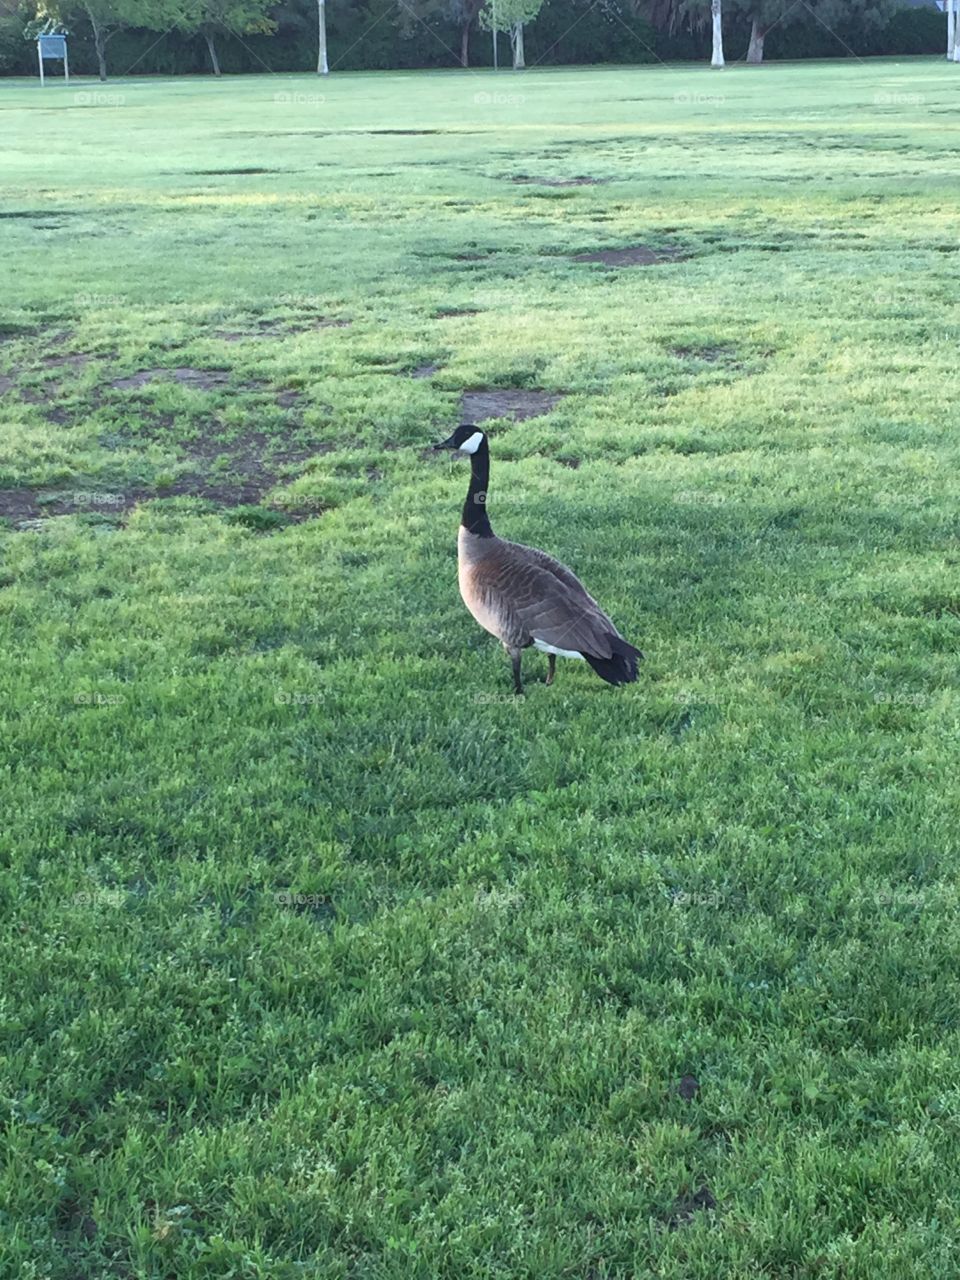 Wild goose at the park